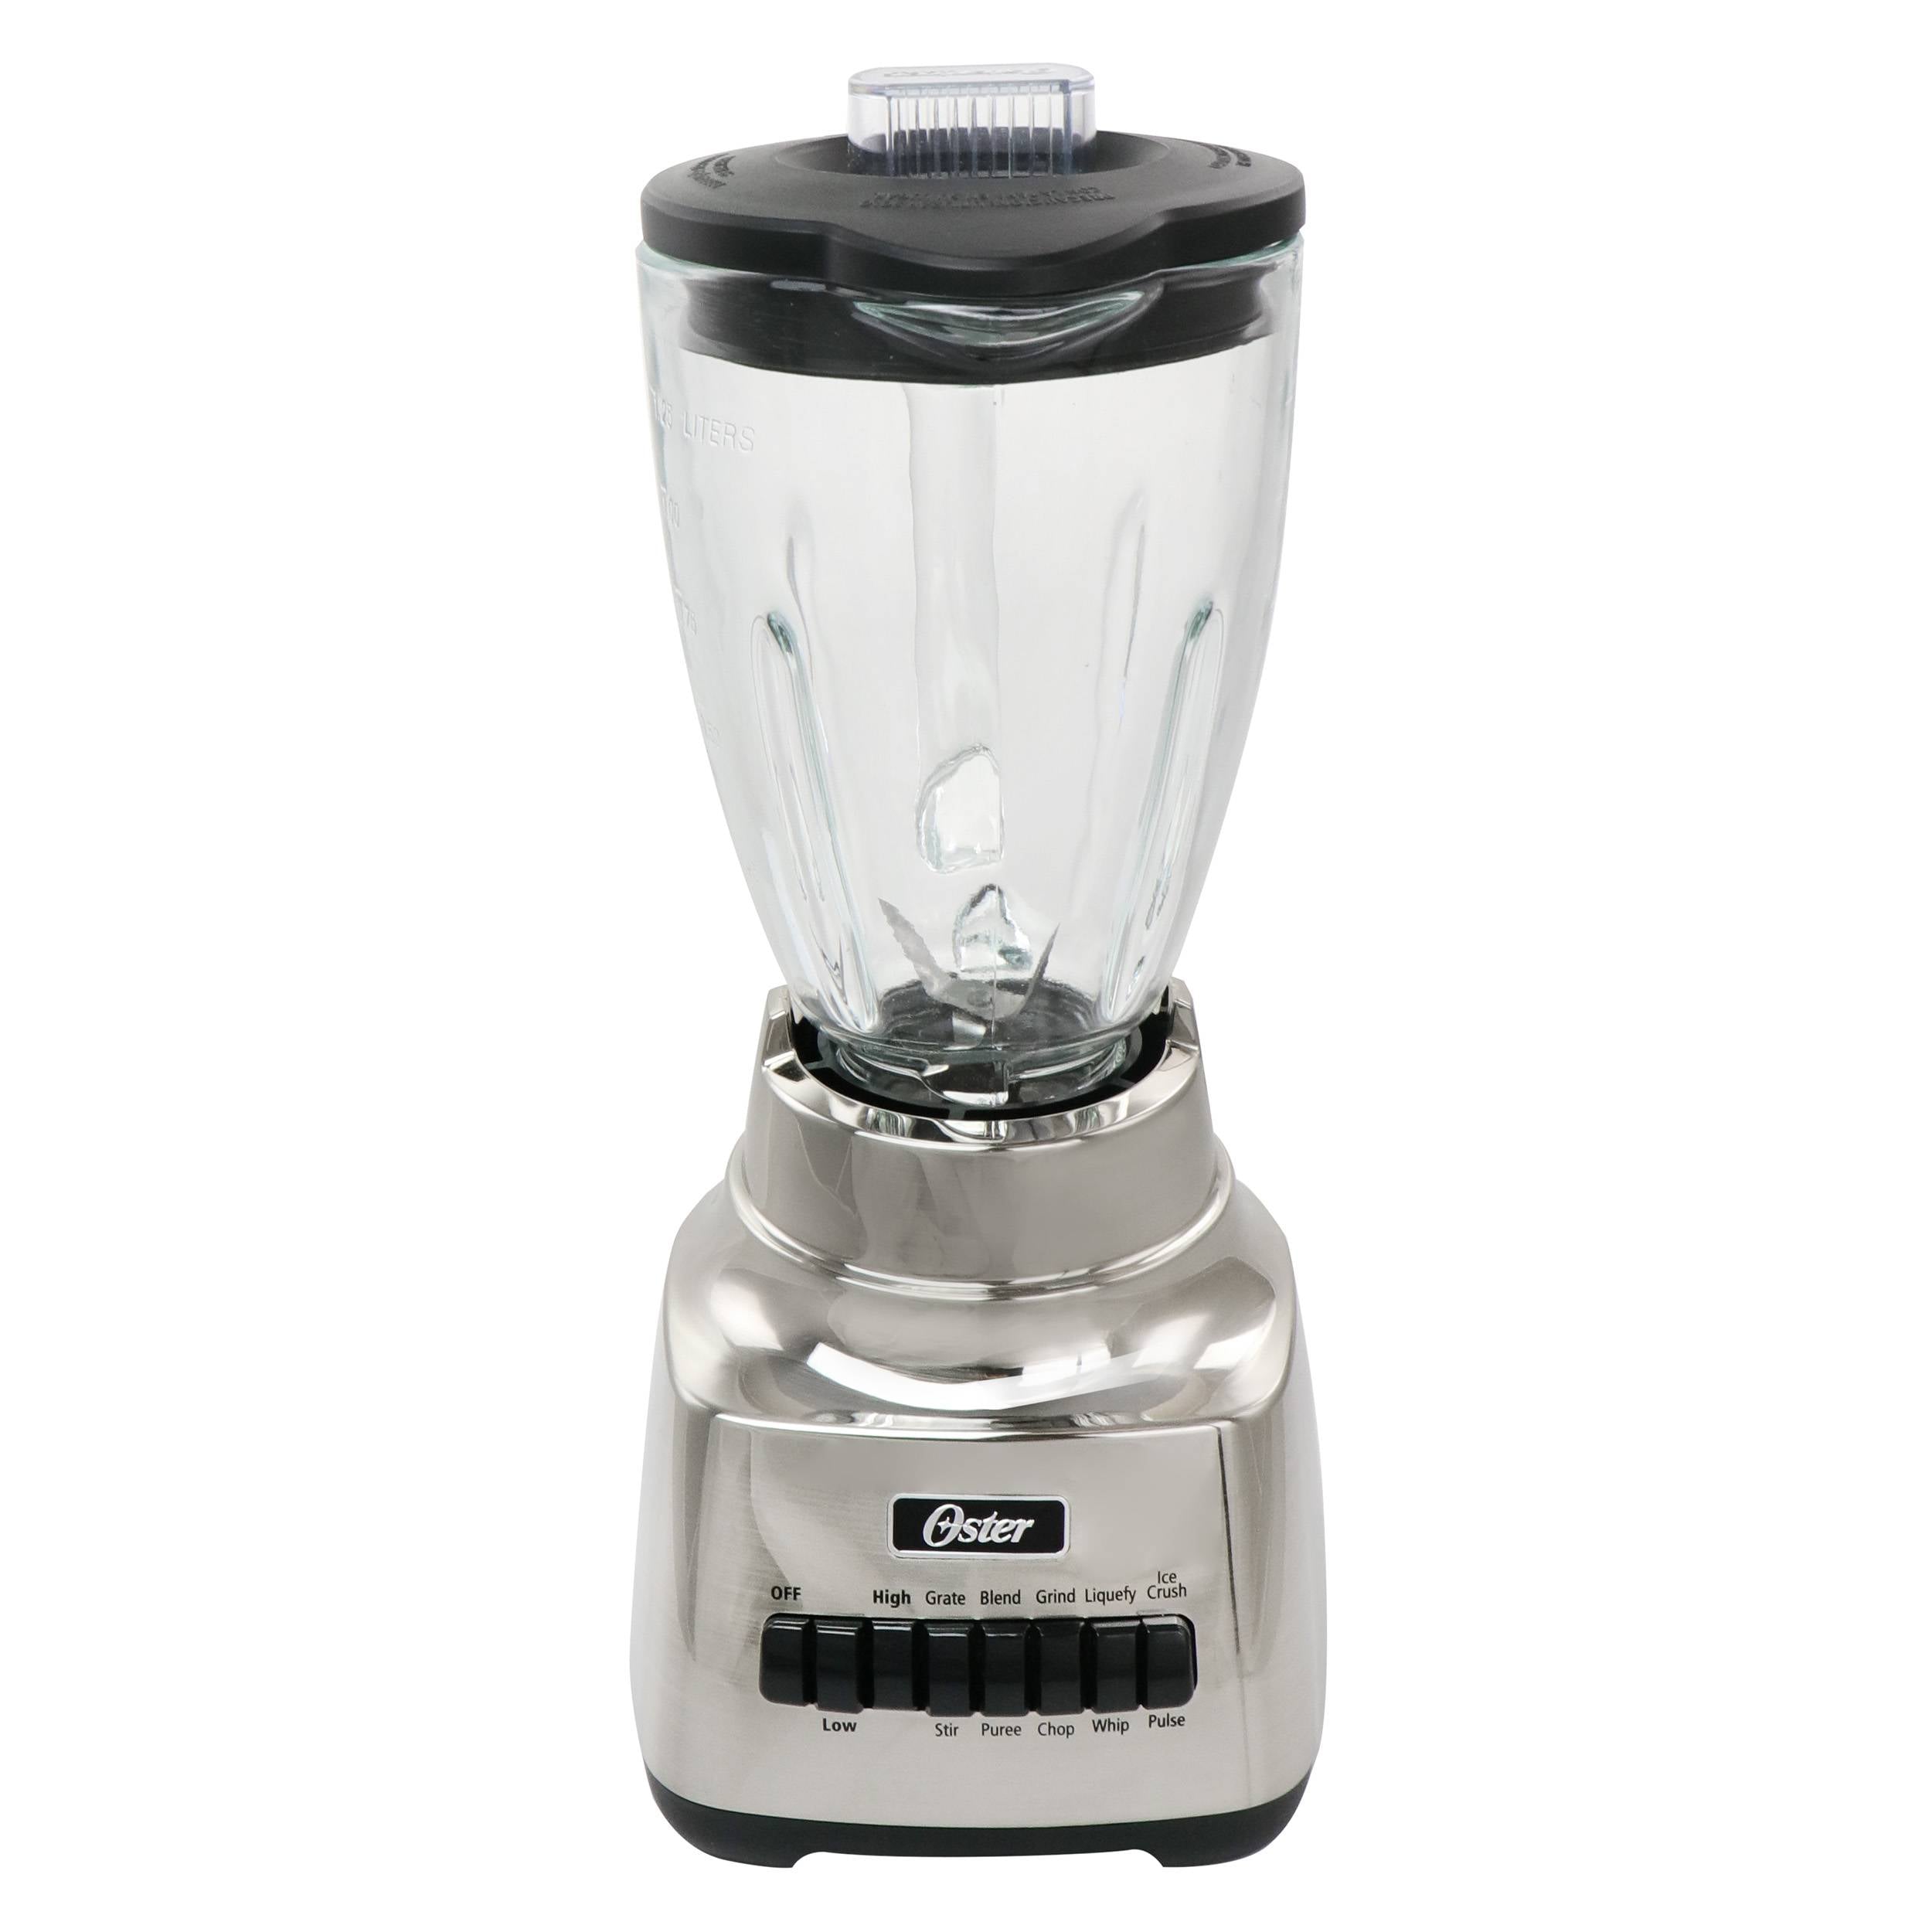 BLACK+DECKER 10-Speed Countertop Blender with 48oz Glass Jar and 4-point  Stainless Steel Blade